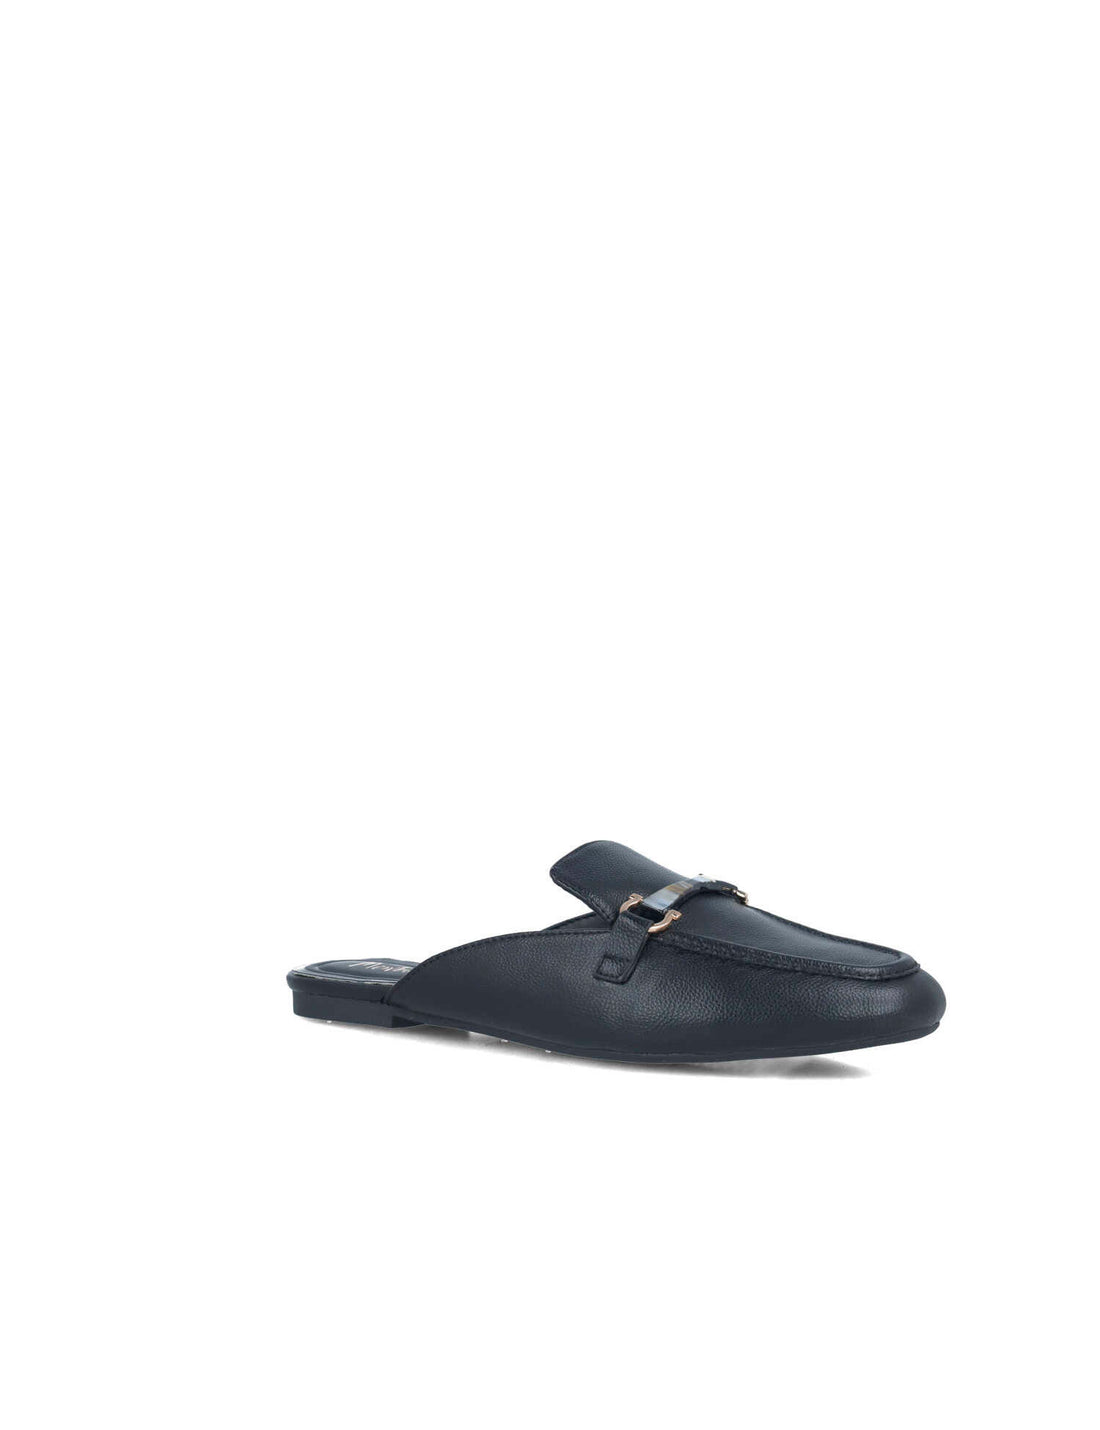 Black Slipper Mules With Silver Hardware_25560_01_02